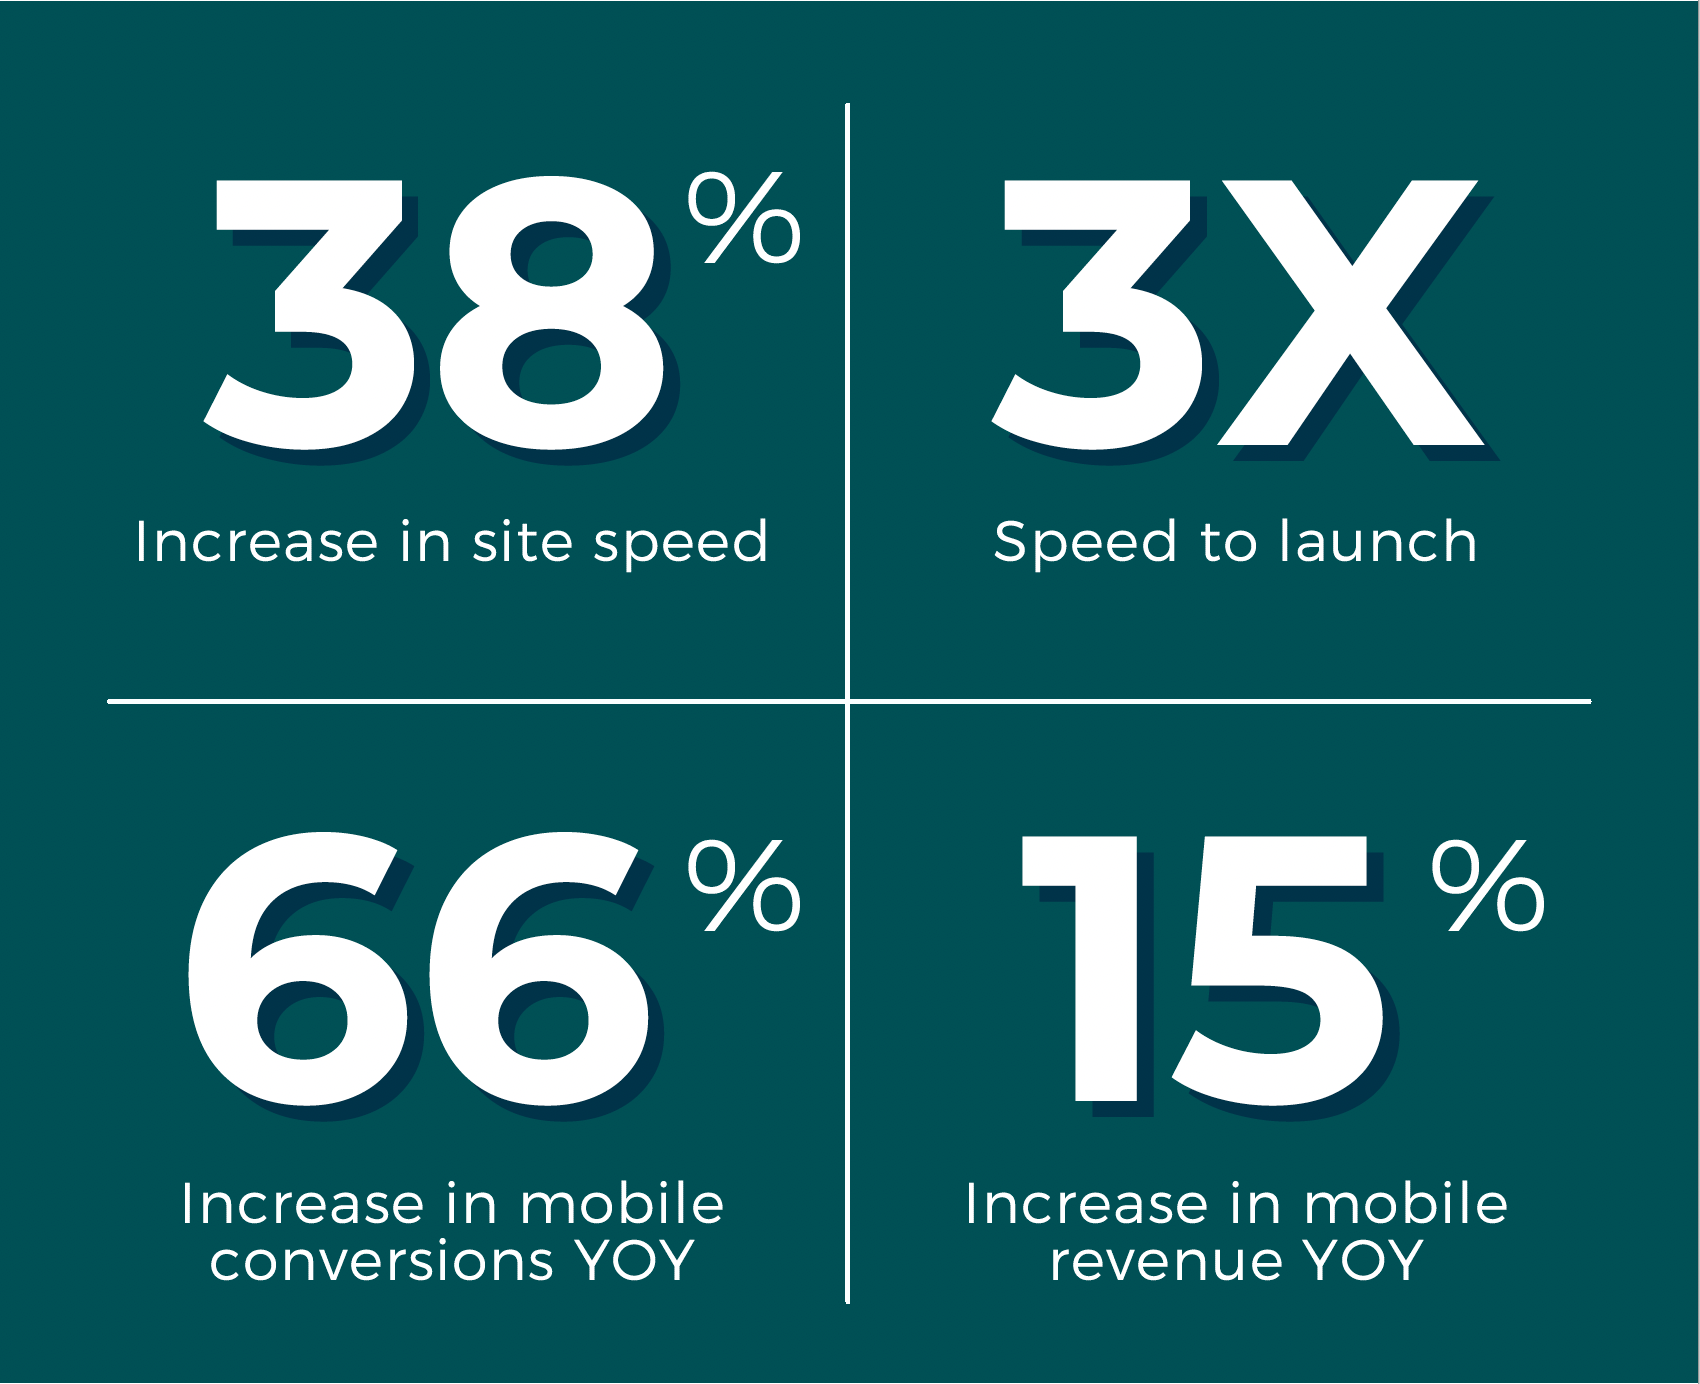 38% increase in site speed; 3X speed to launch; 66% increase in mobile conversions YOY; 15% Increase in mobile revenue YOY